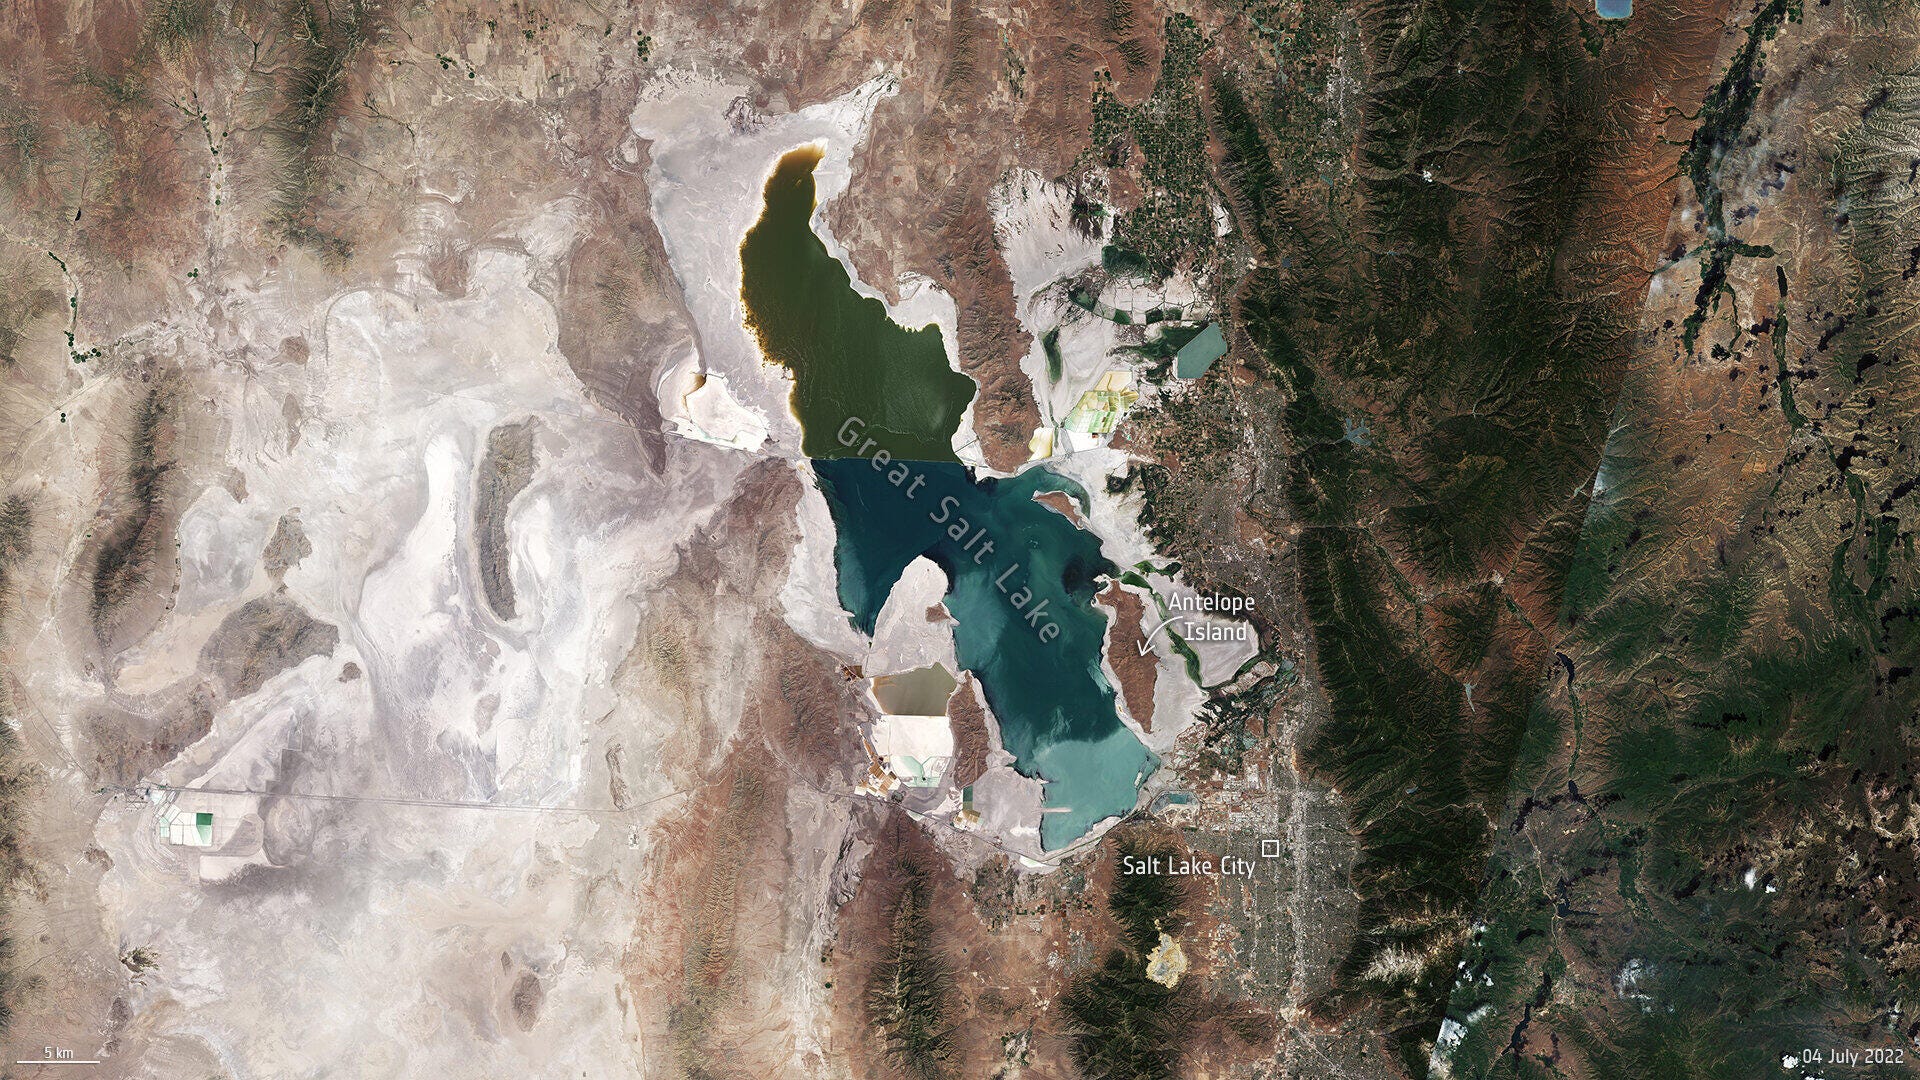 Satellite image shows Utah's Great Salt Lake greatly diminished in 2022, with white areas showing where water levels have dropped